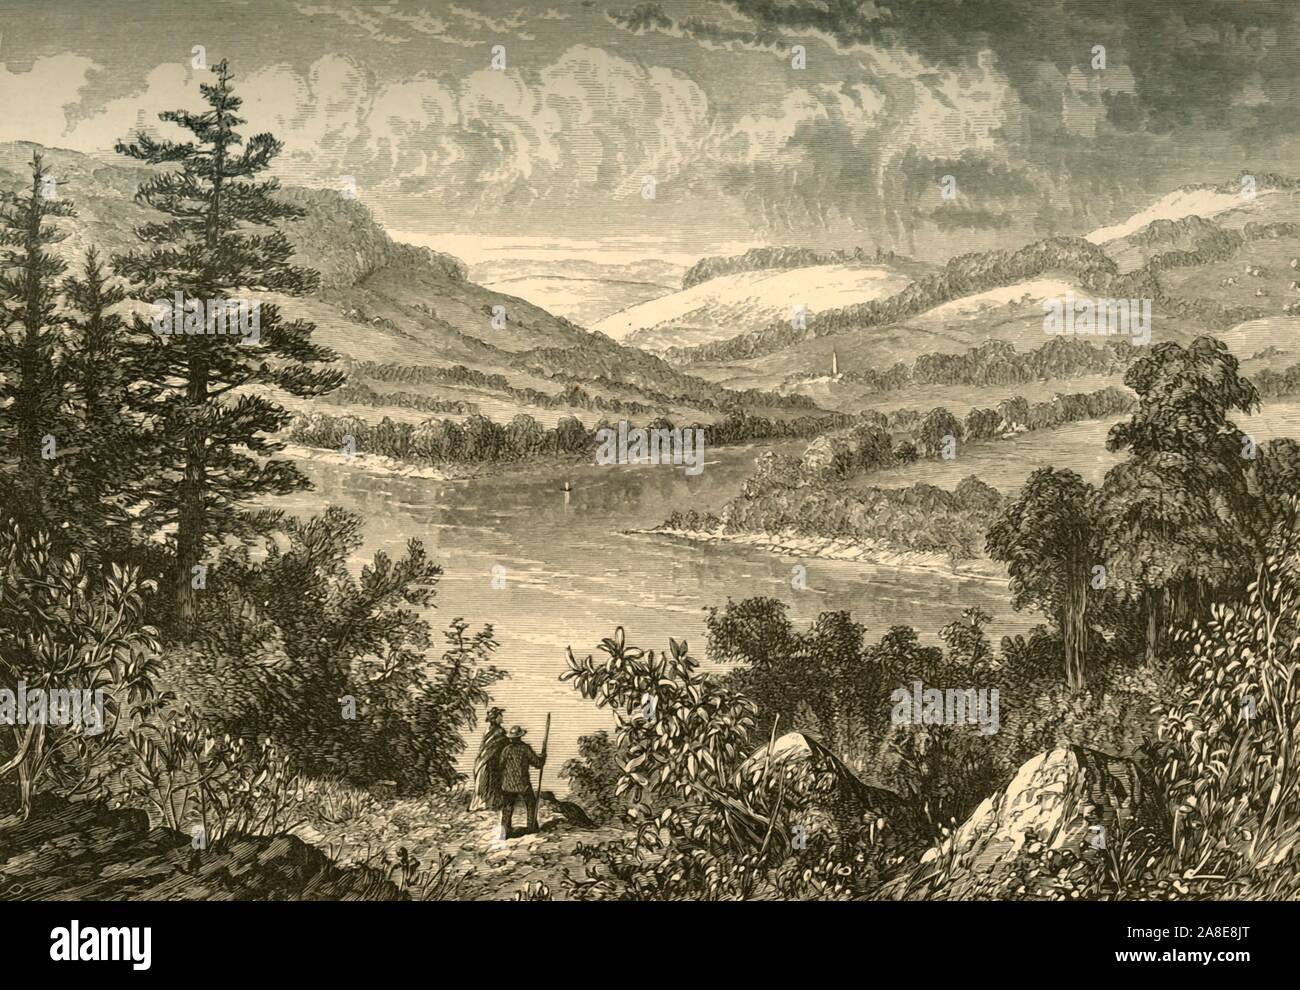 'Delaware Water-Gap, Looking South from Shawnee', 1872. View of the 'gap' where the Delaware River cuts through a ridge of the Appalachian Mountains on the border between New Jersey and Pennsylvania, USA. From &quot;Picturesque America; or, The Land We Live In, A Delineation by Pen and Pencil of the Mountains, Rivers, Lakes...with Illustrations on Steel and Wood by Eminent American Artists&quot; Vol. I, edited by William Cullen Bryant. [D. Appleton and Company, New York, 1872] Stock Photo